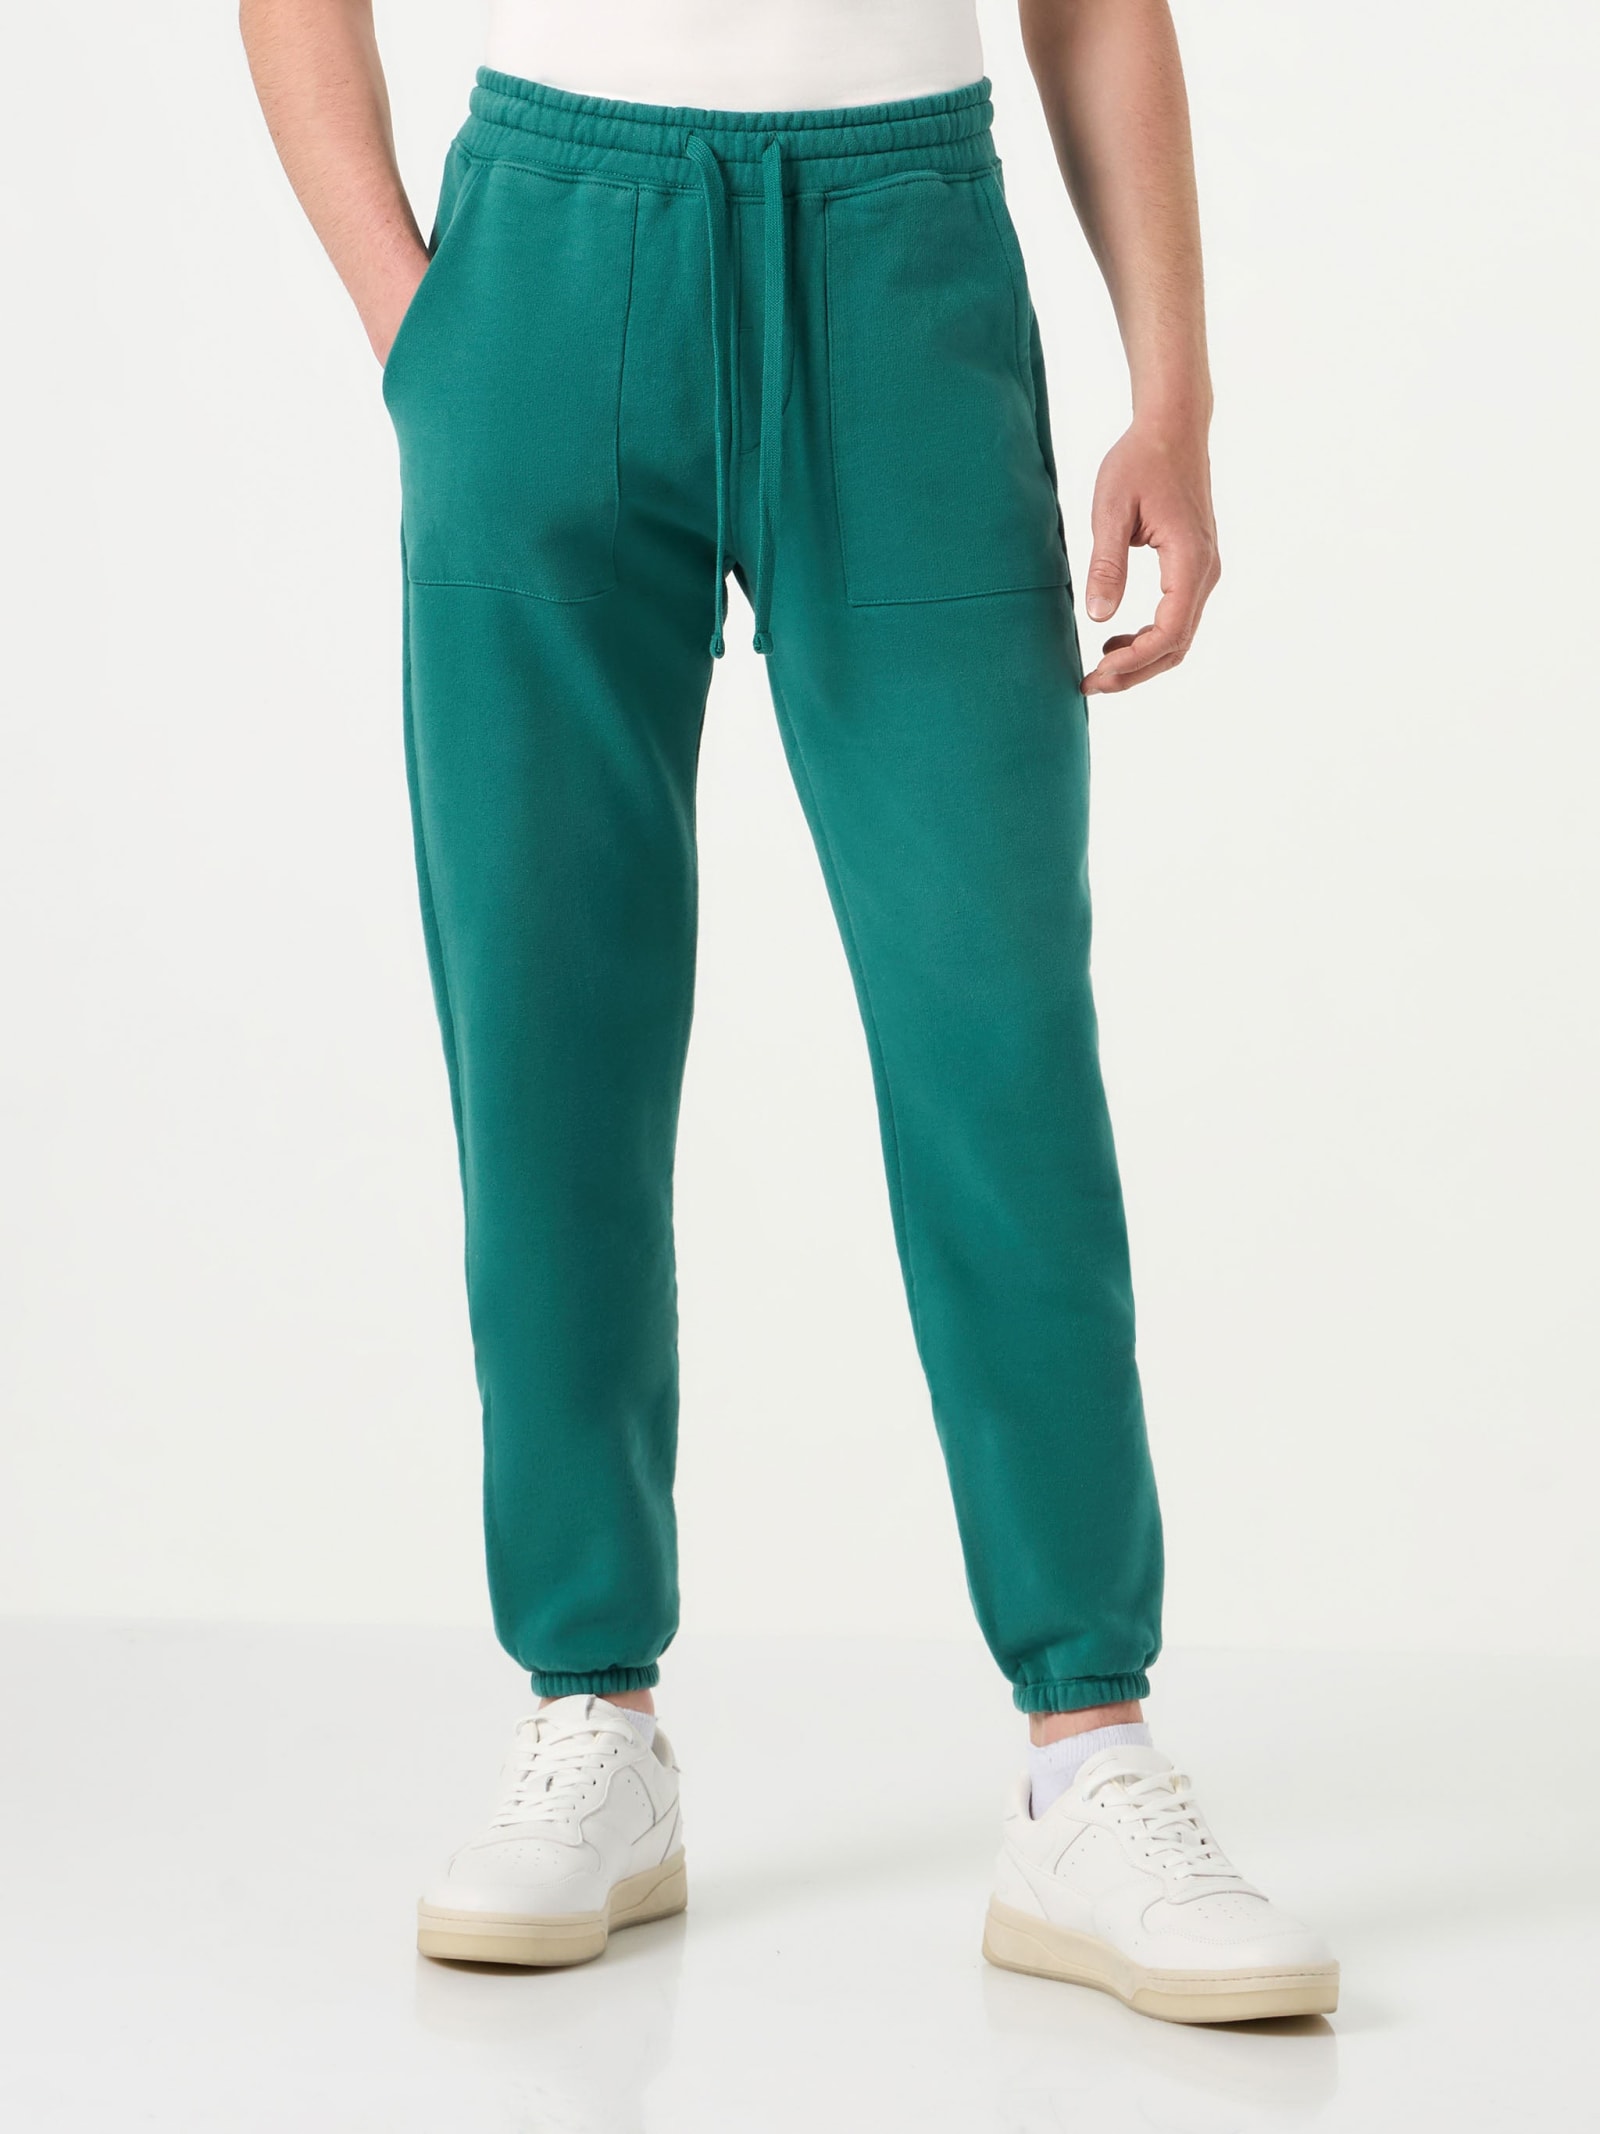 Green Track Pants Pantone Special Edition